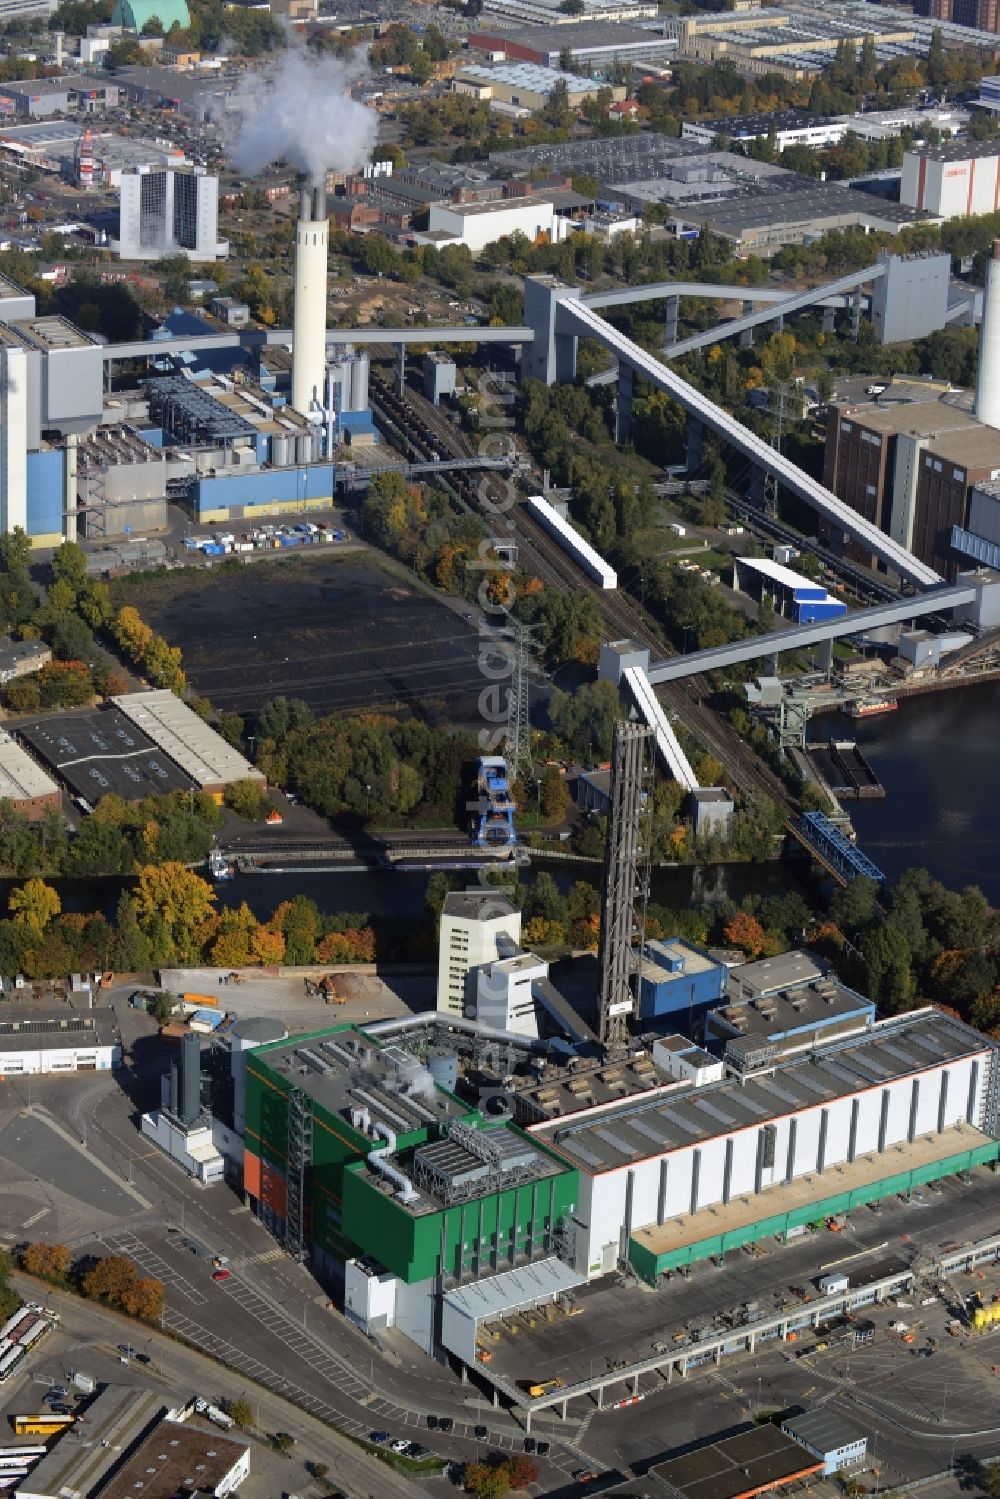 Aerial image Berlin - Power plants and exhaust towers of coal thermal power station at the Sophienwerder Weg in Ruhleben in Berlin in Germany